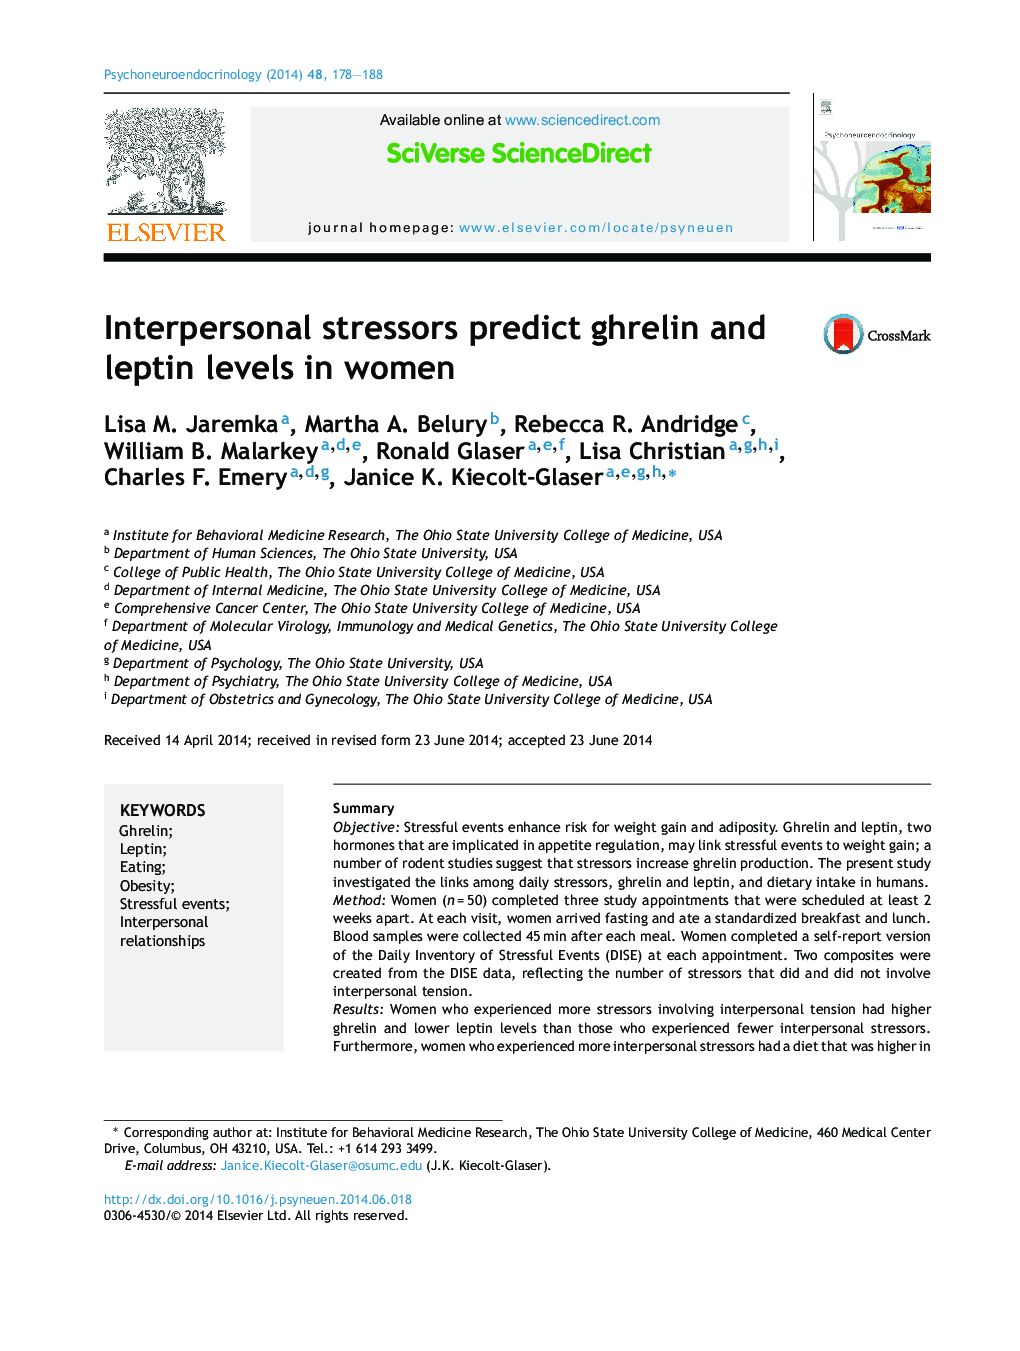 Interpersonal stressors predict ghrelin and leptin levels in women